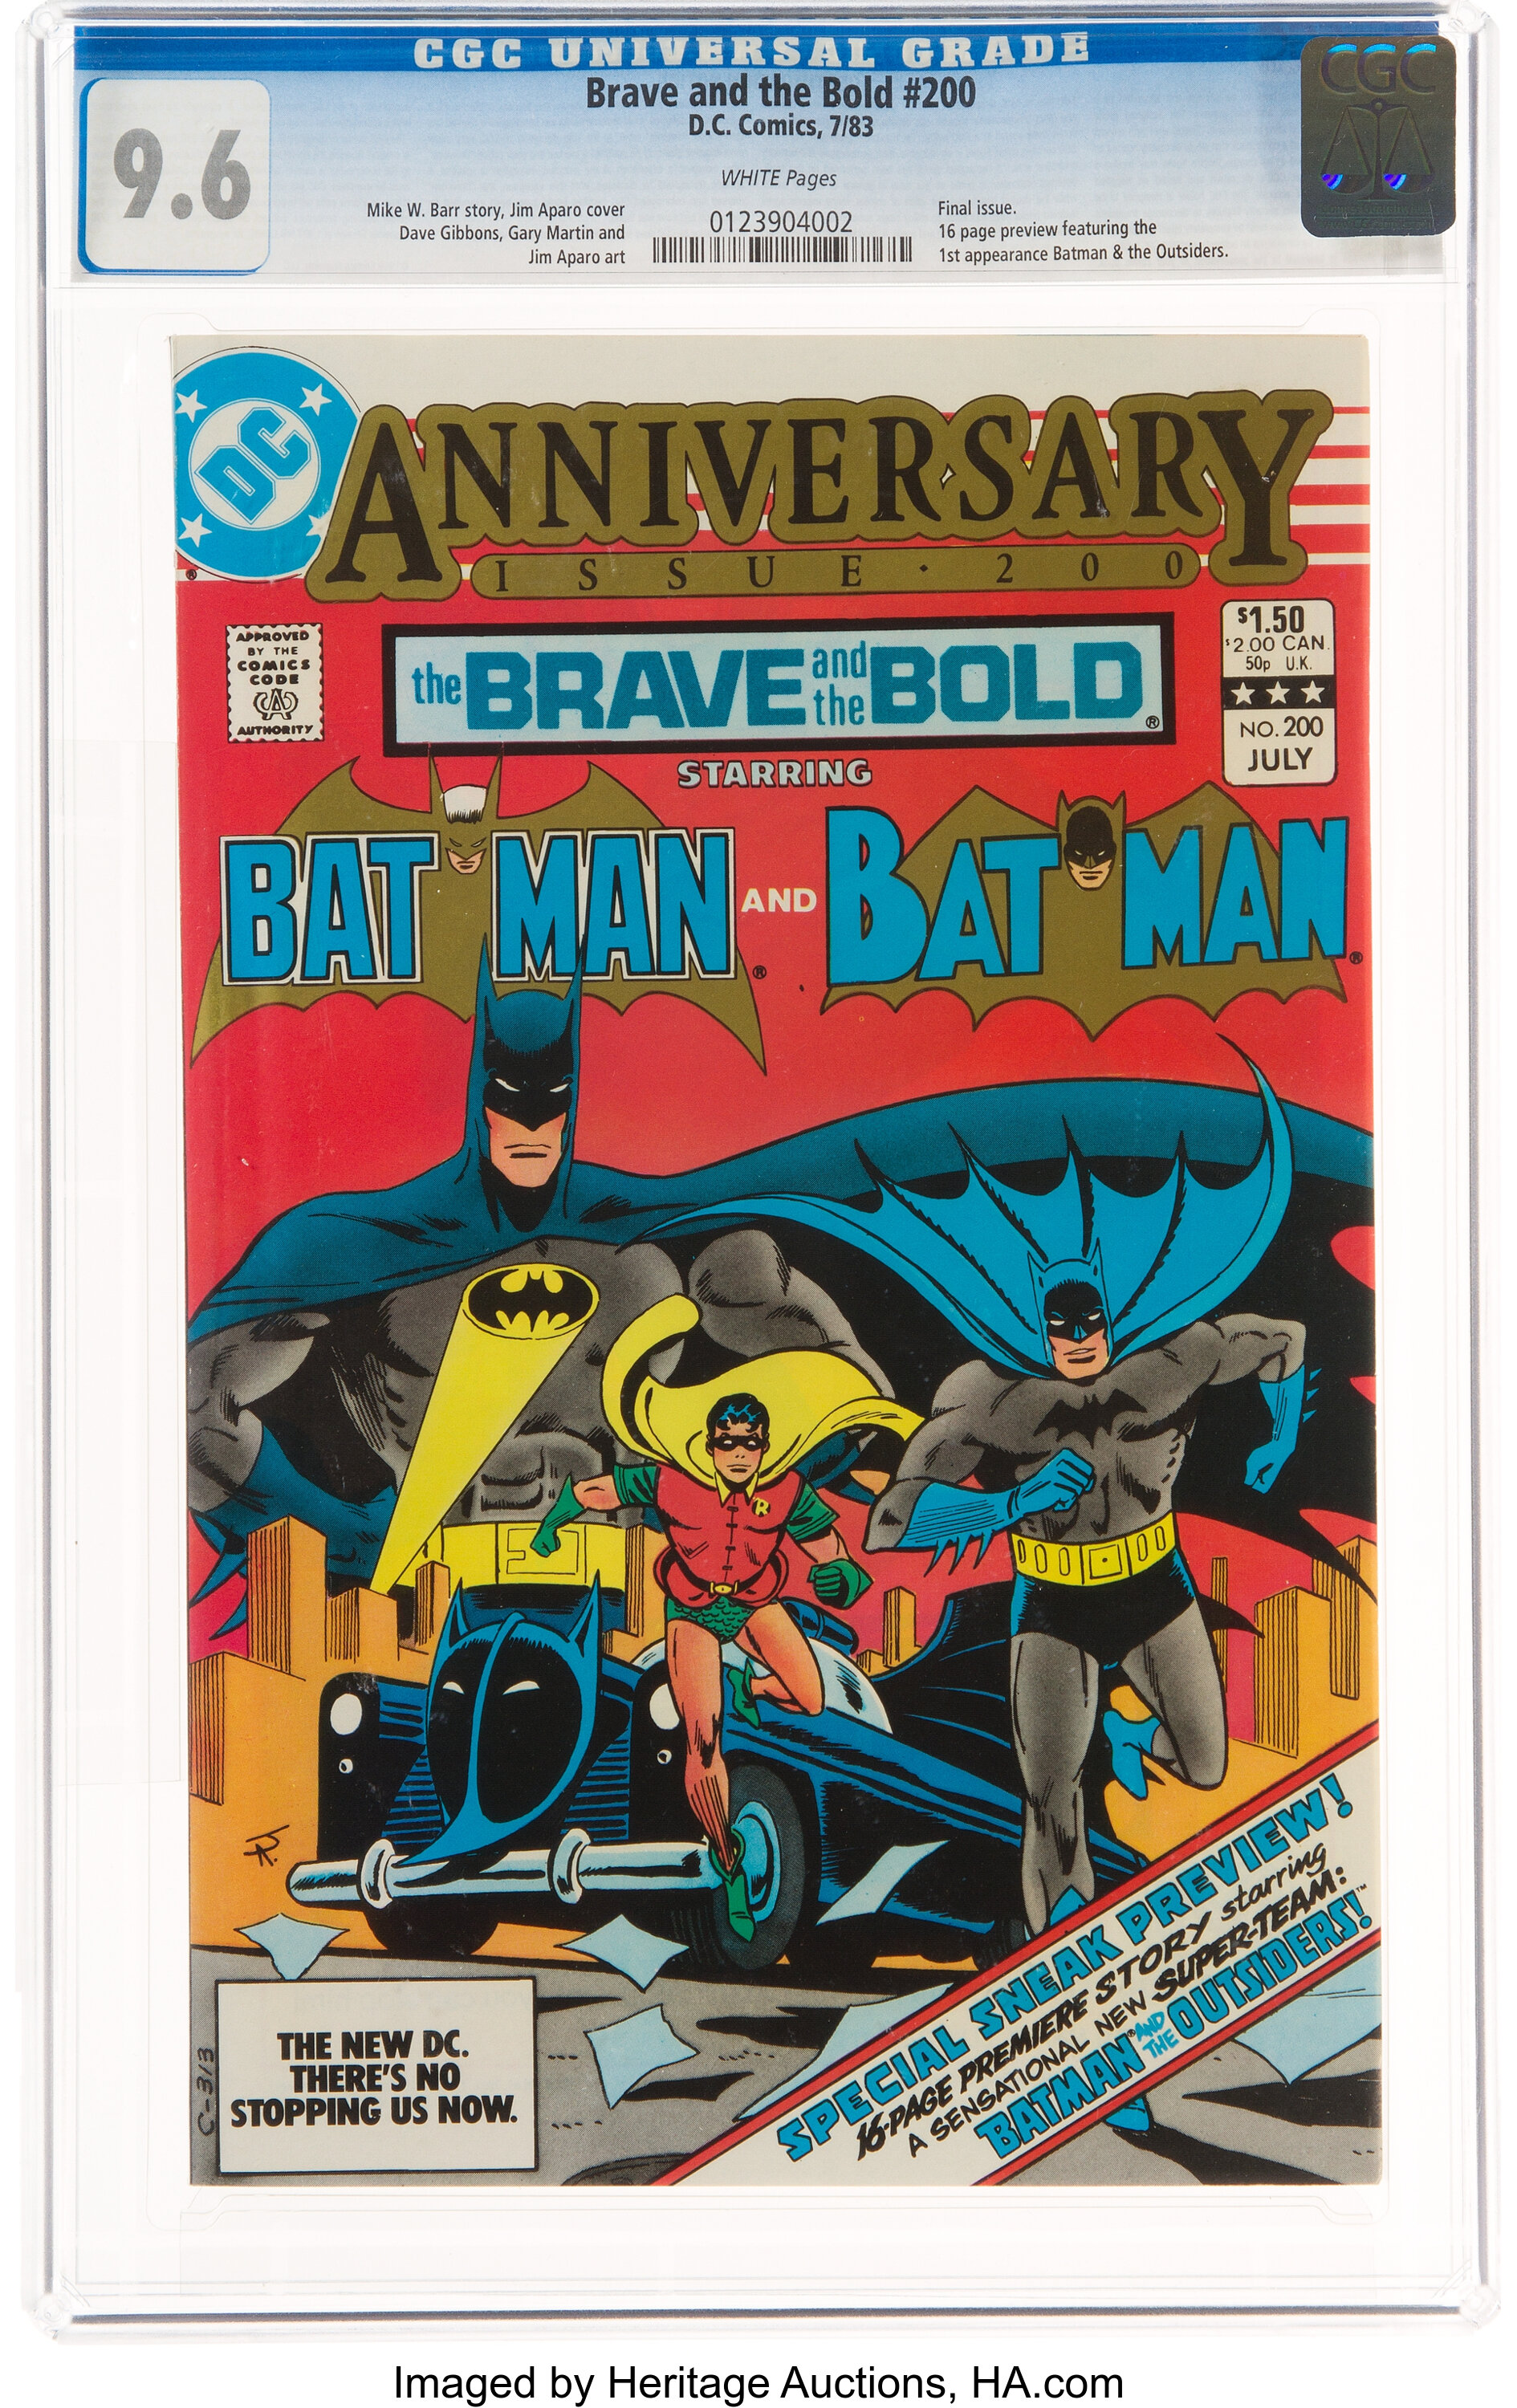 The Brave and the Bold #200 Batman (DC, 1983) CGC NM+  White | Lot  #19202 | Heritage Auctions